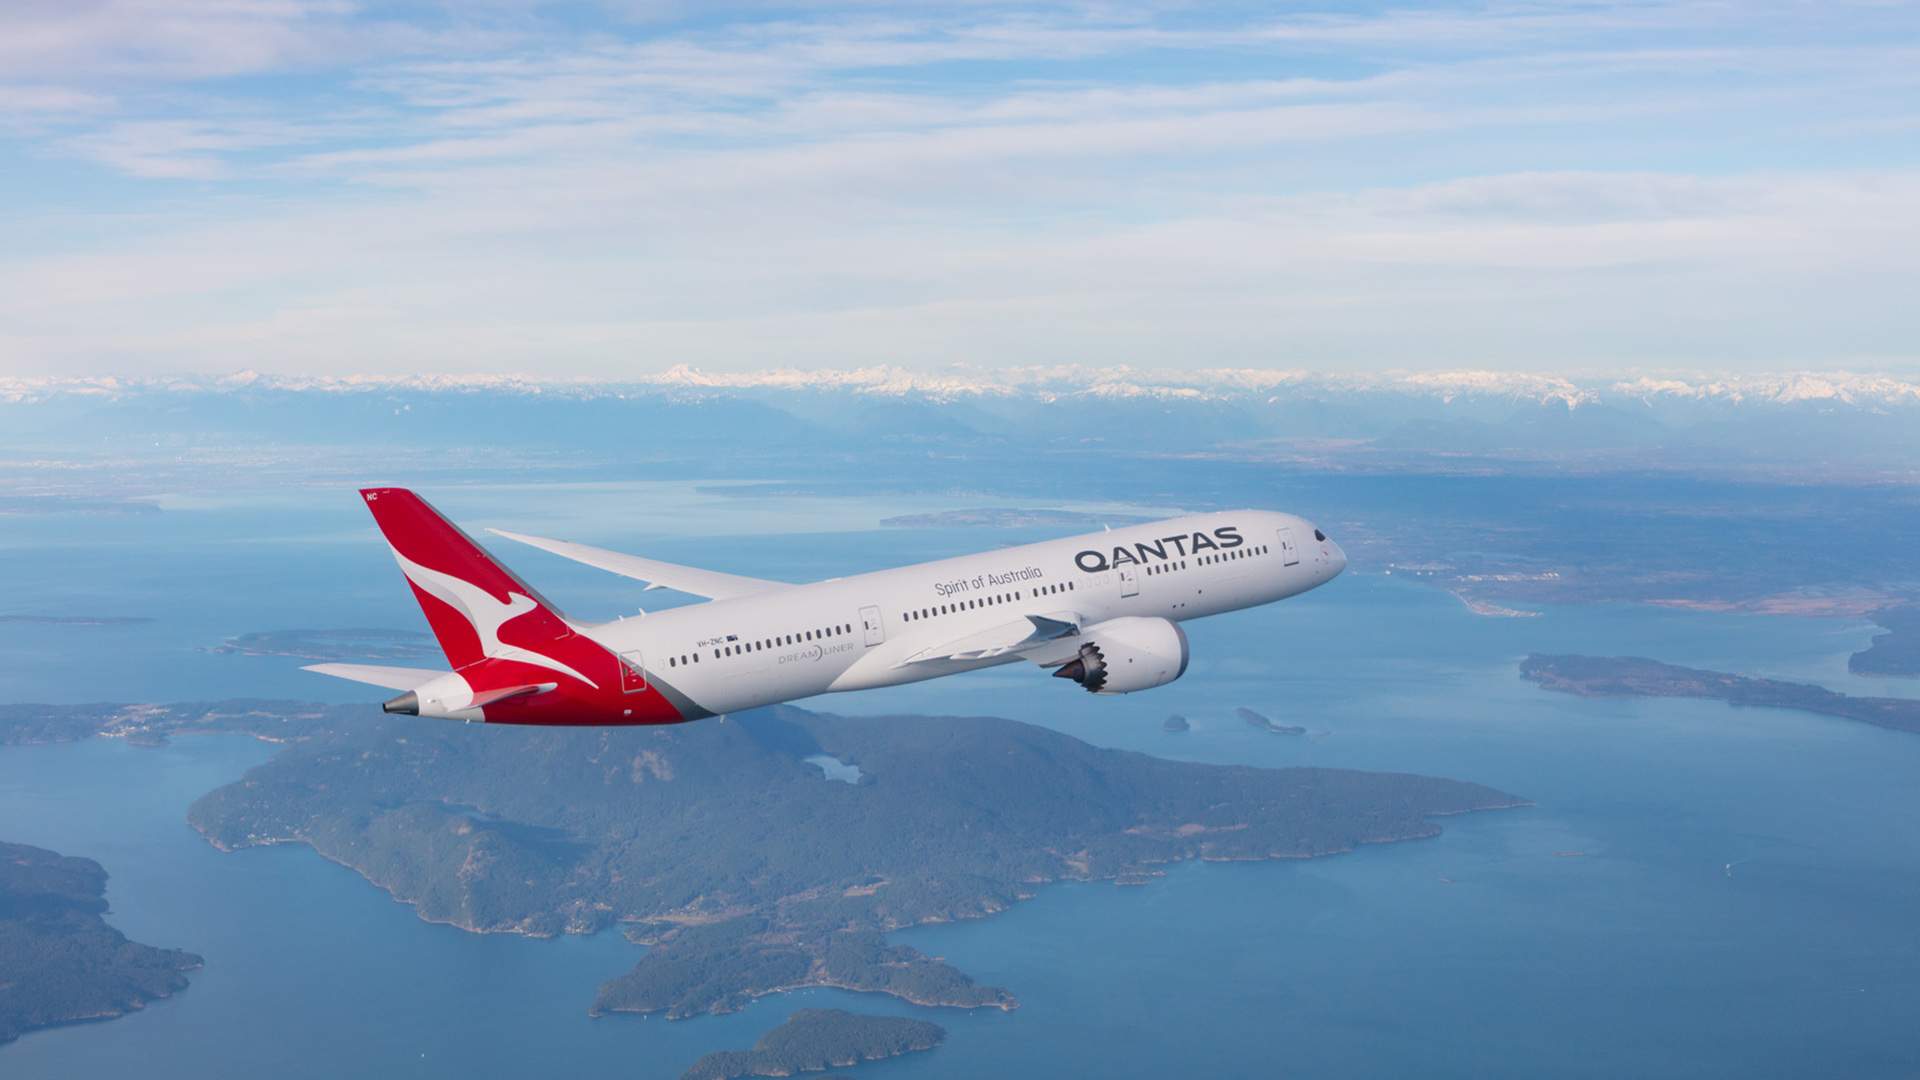 Qantas Has Been Named the World's Safest Airline for 2019